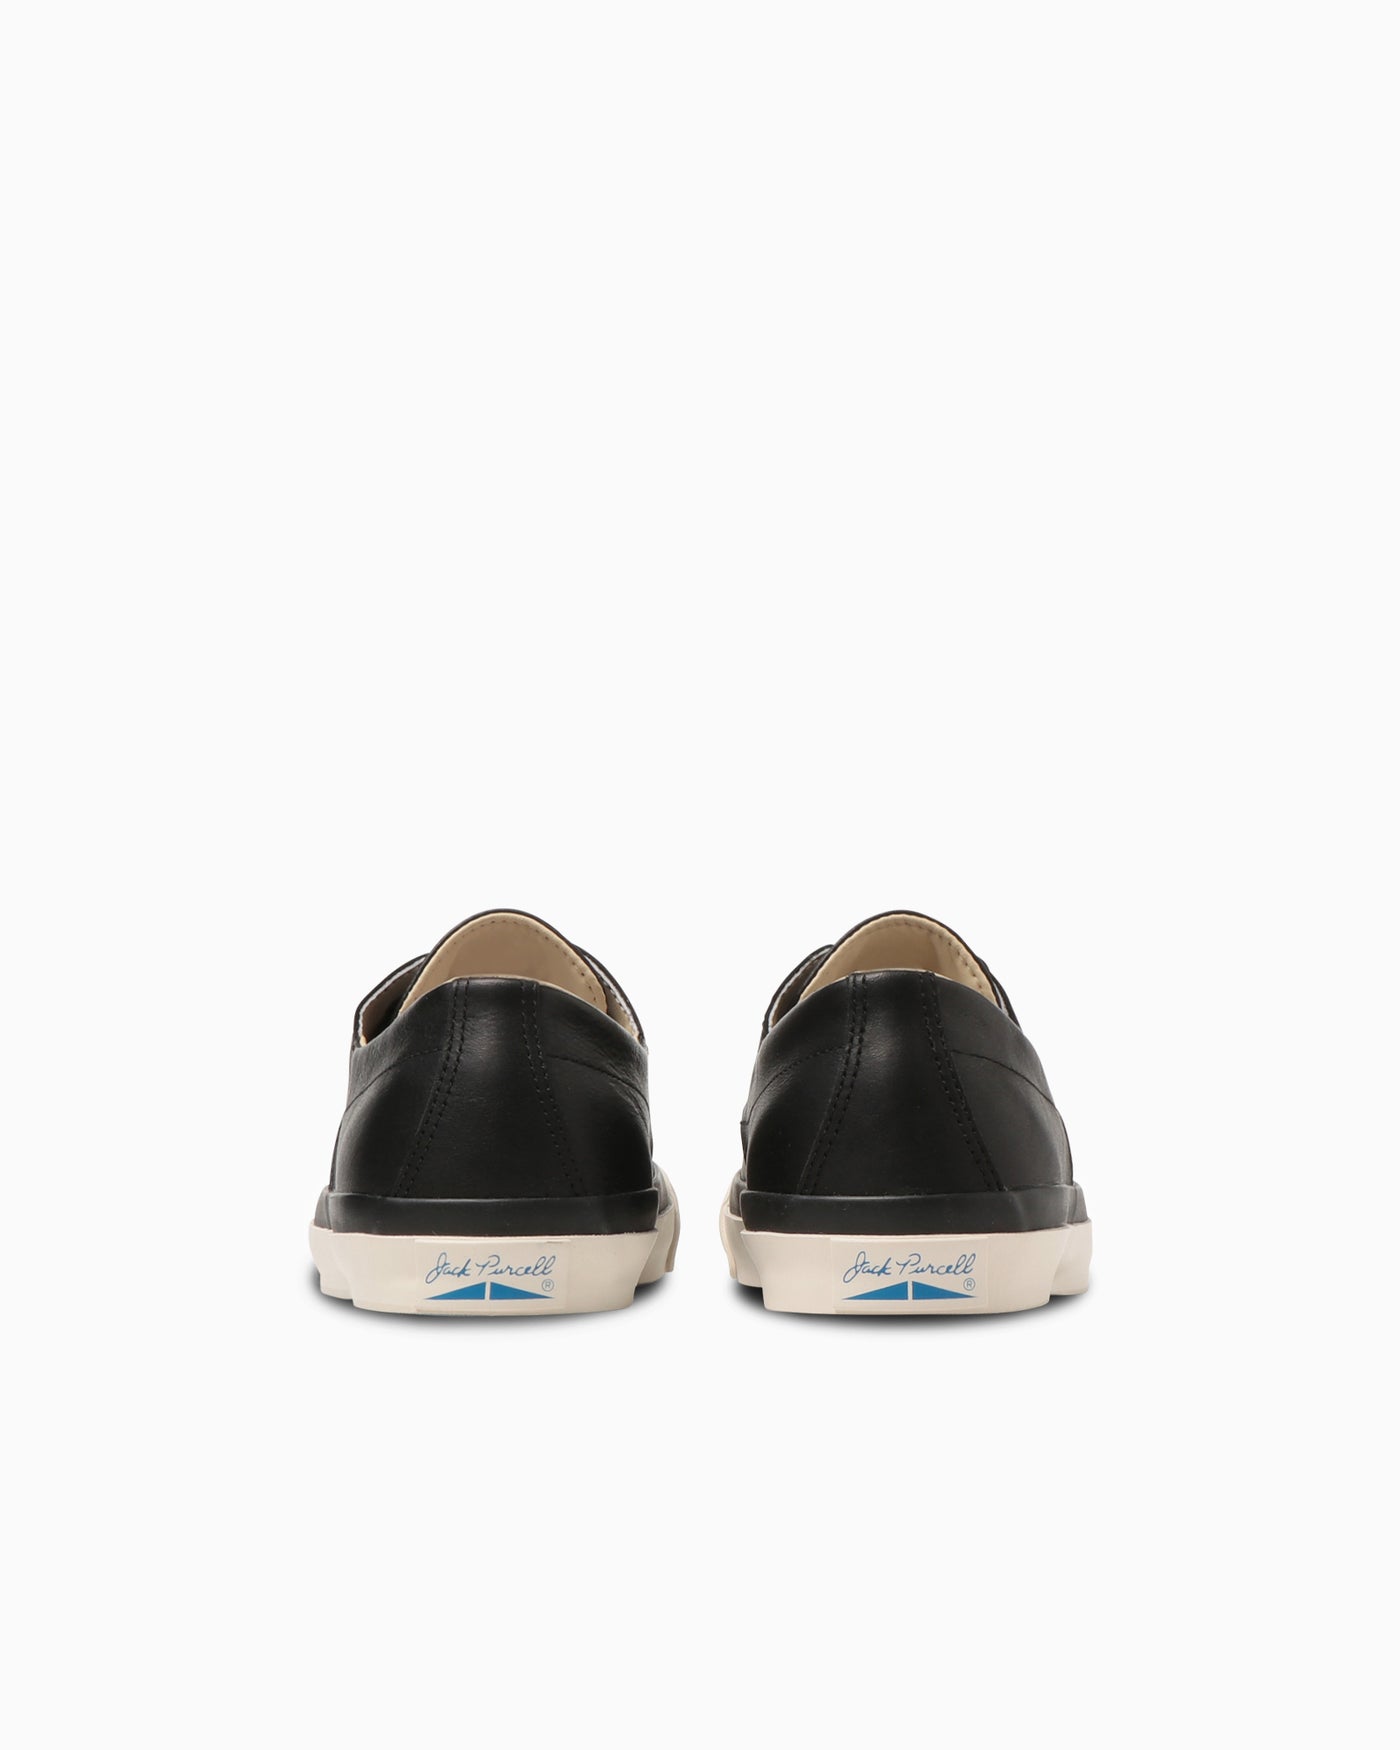 JACK PURCELL MOCCASIN RH